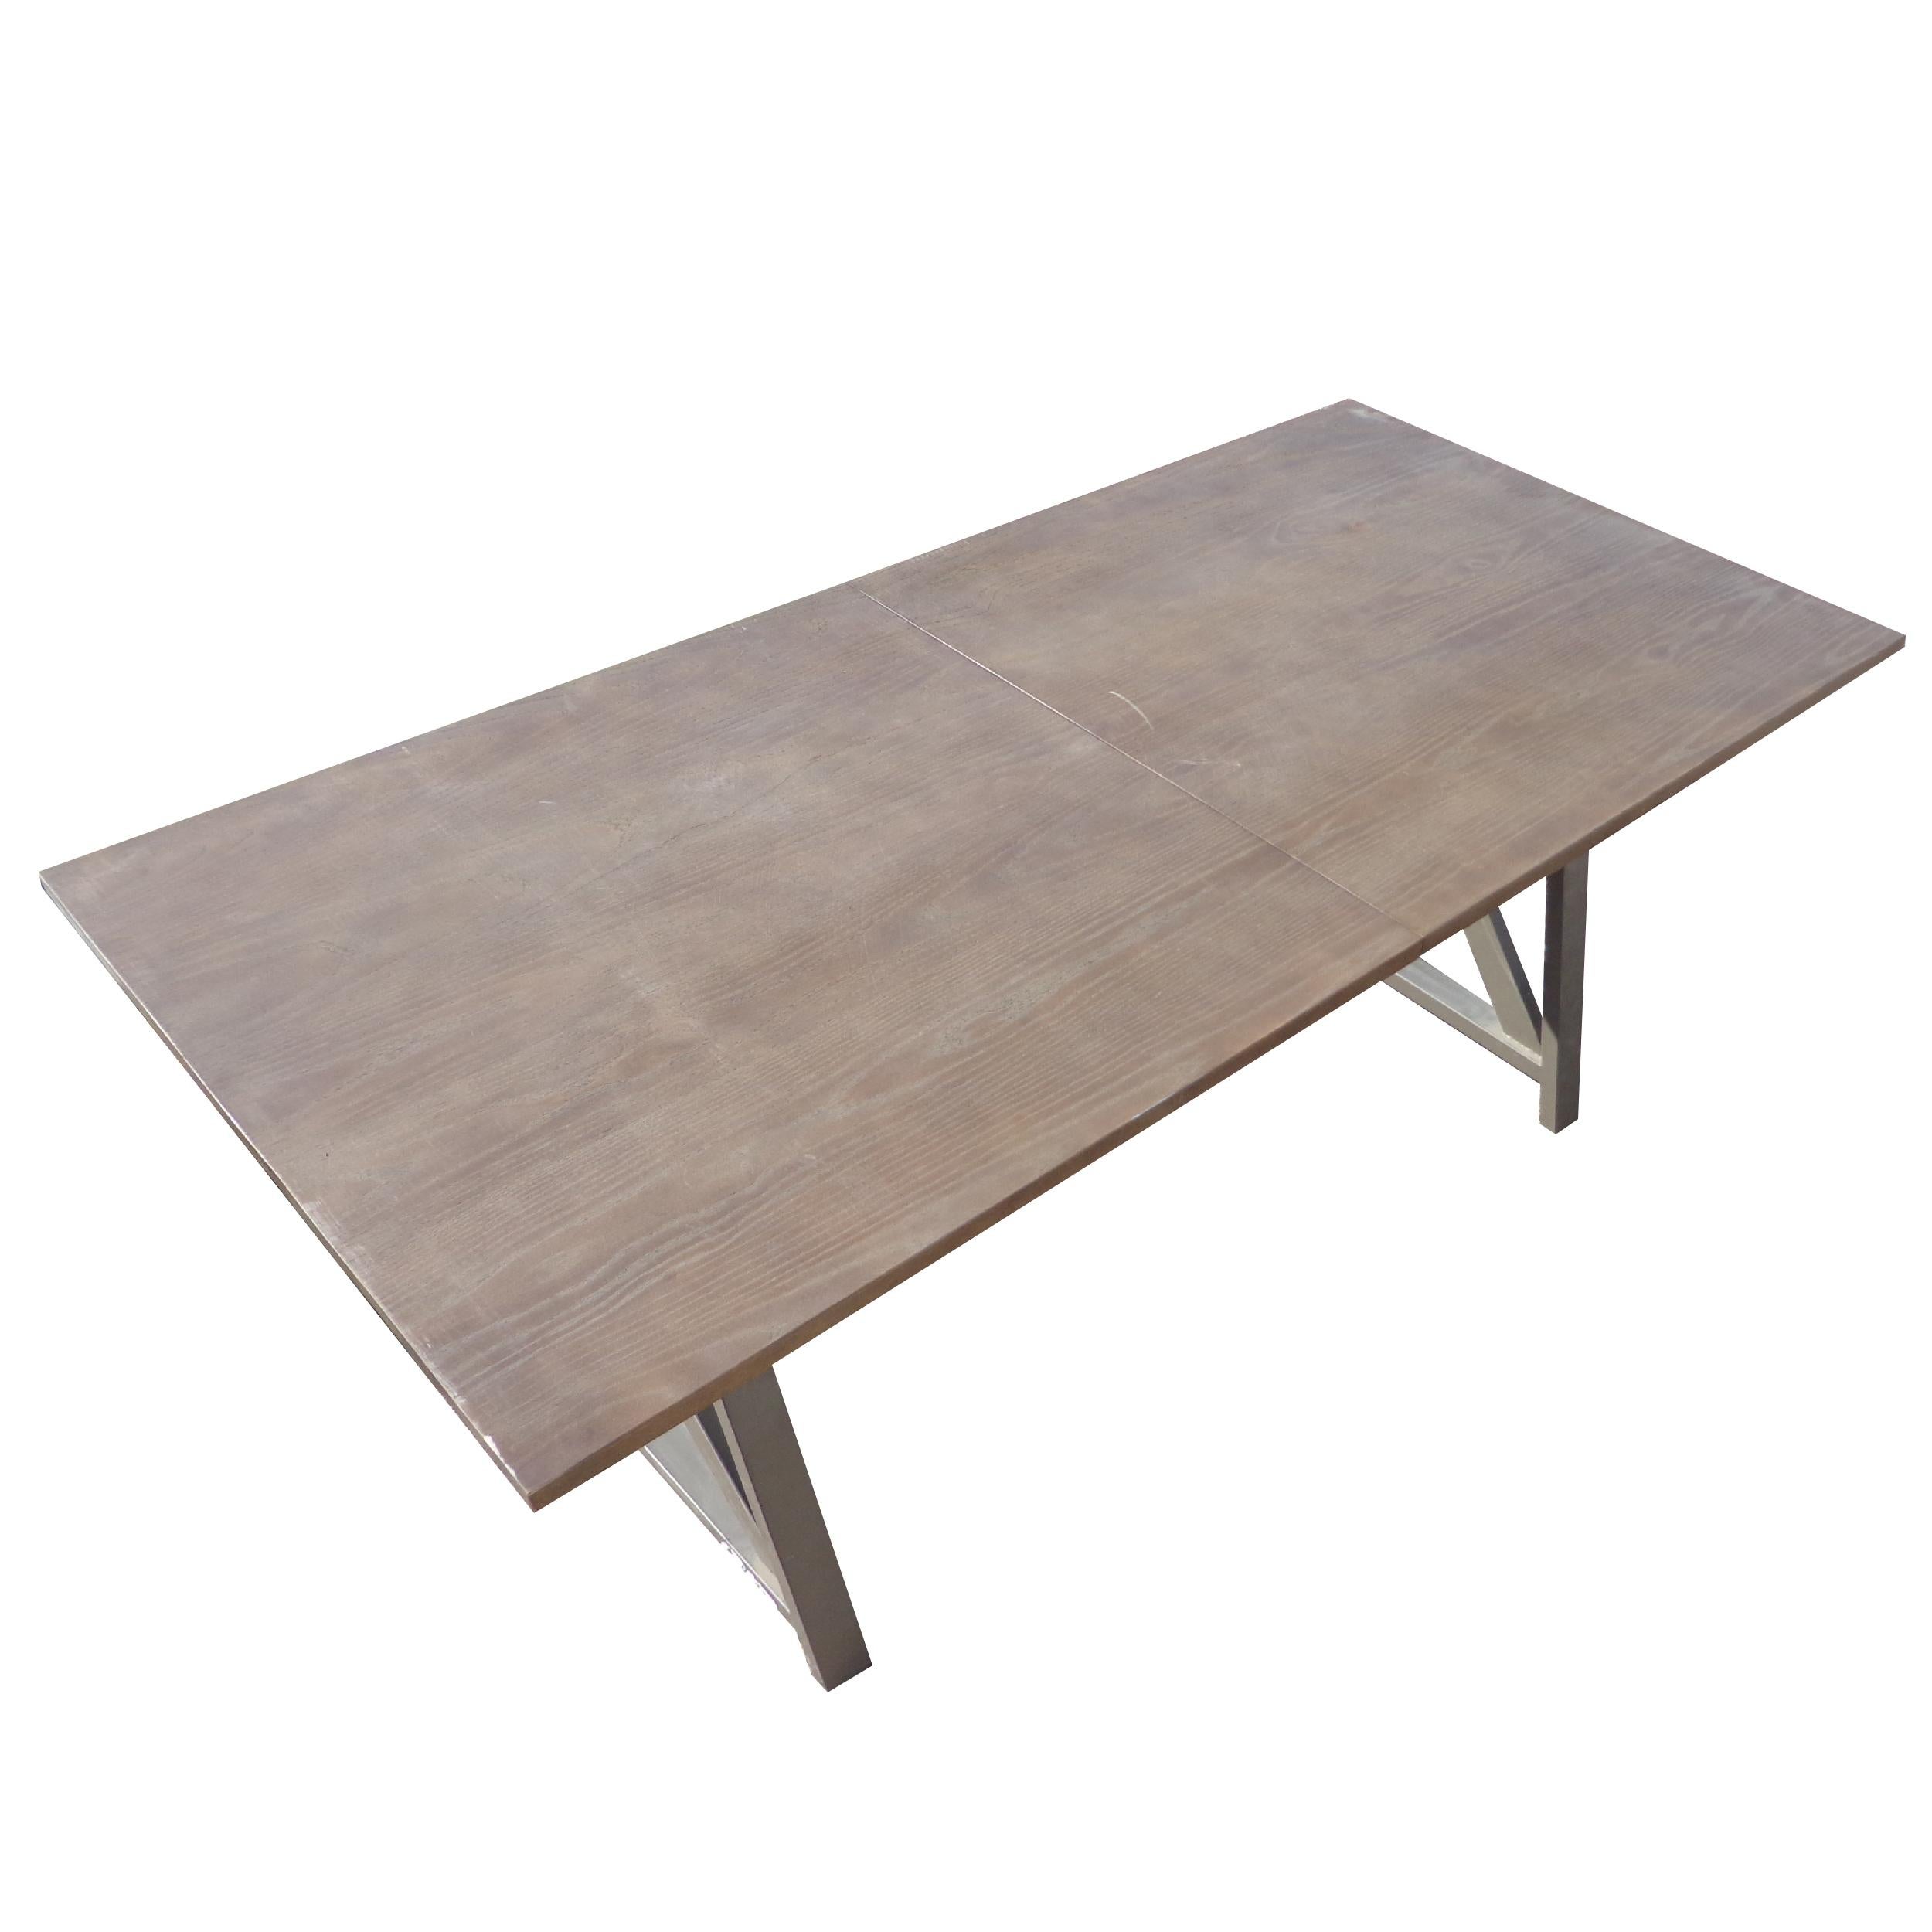 Contemporary Industrial Trestle Base Work Table Desk For Sale